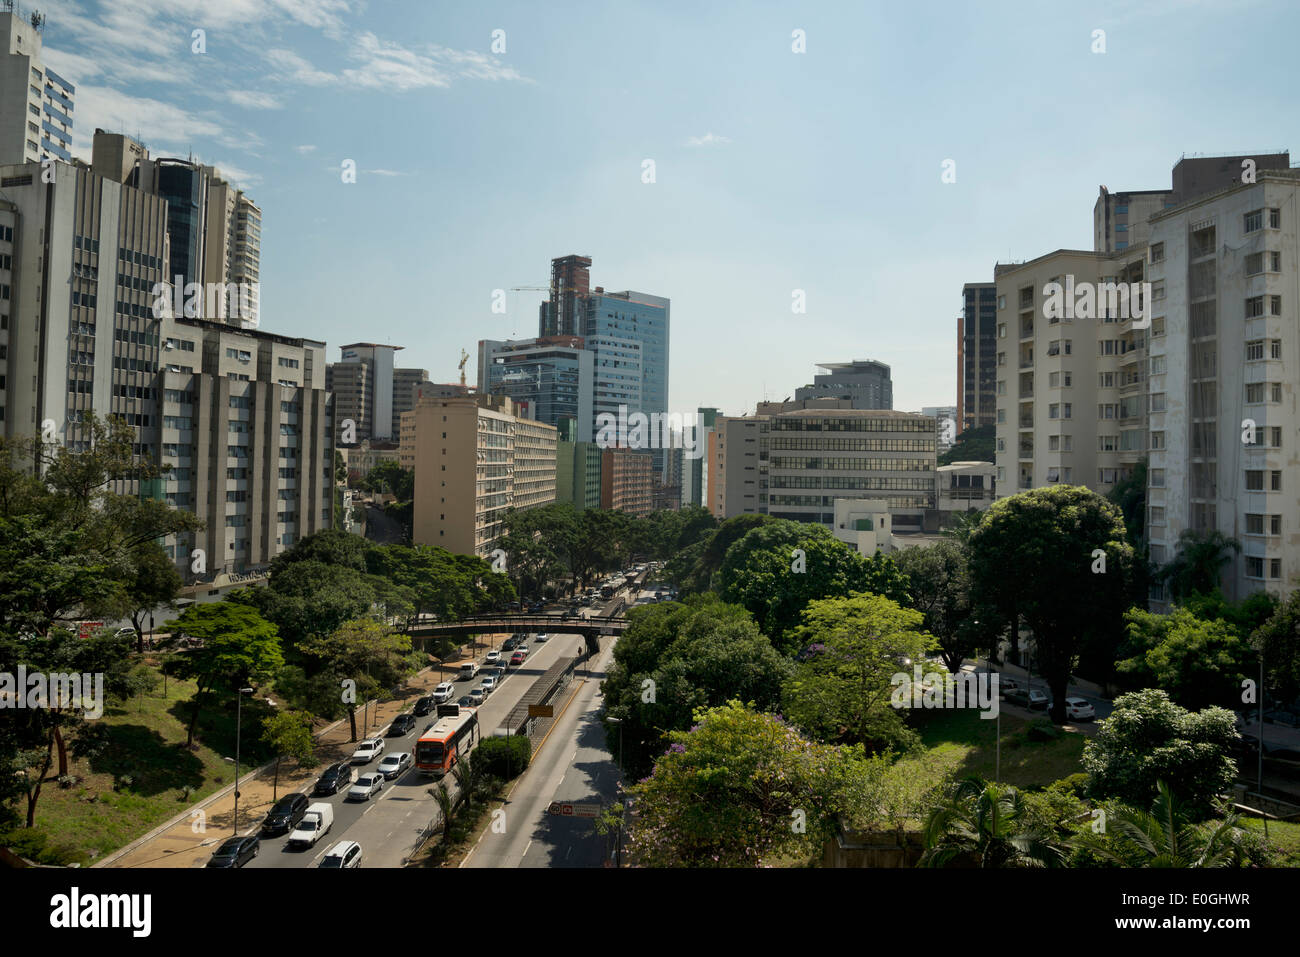 View over part of a residential area of Sao Paulo from Paulista district Stock Photo